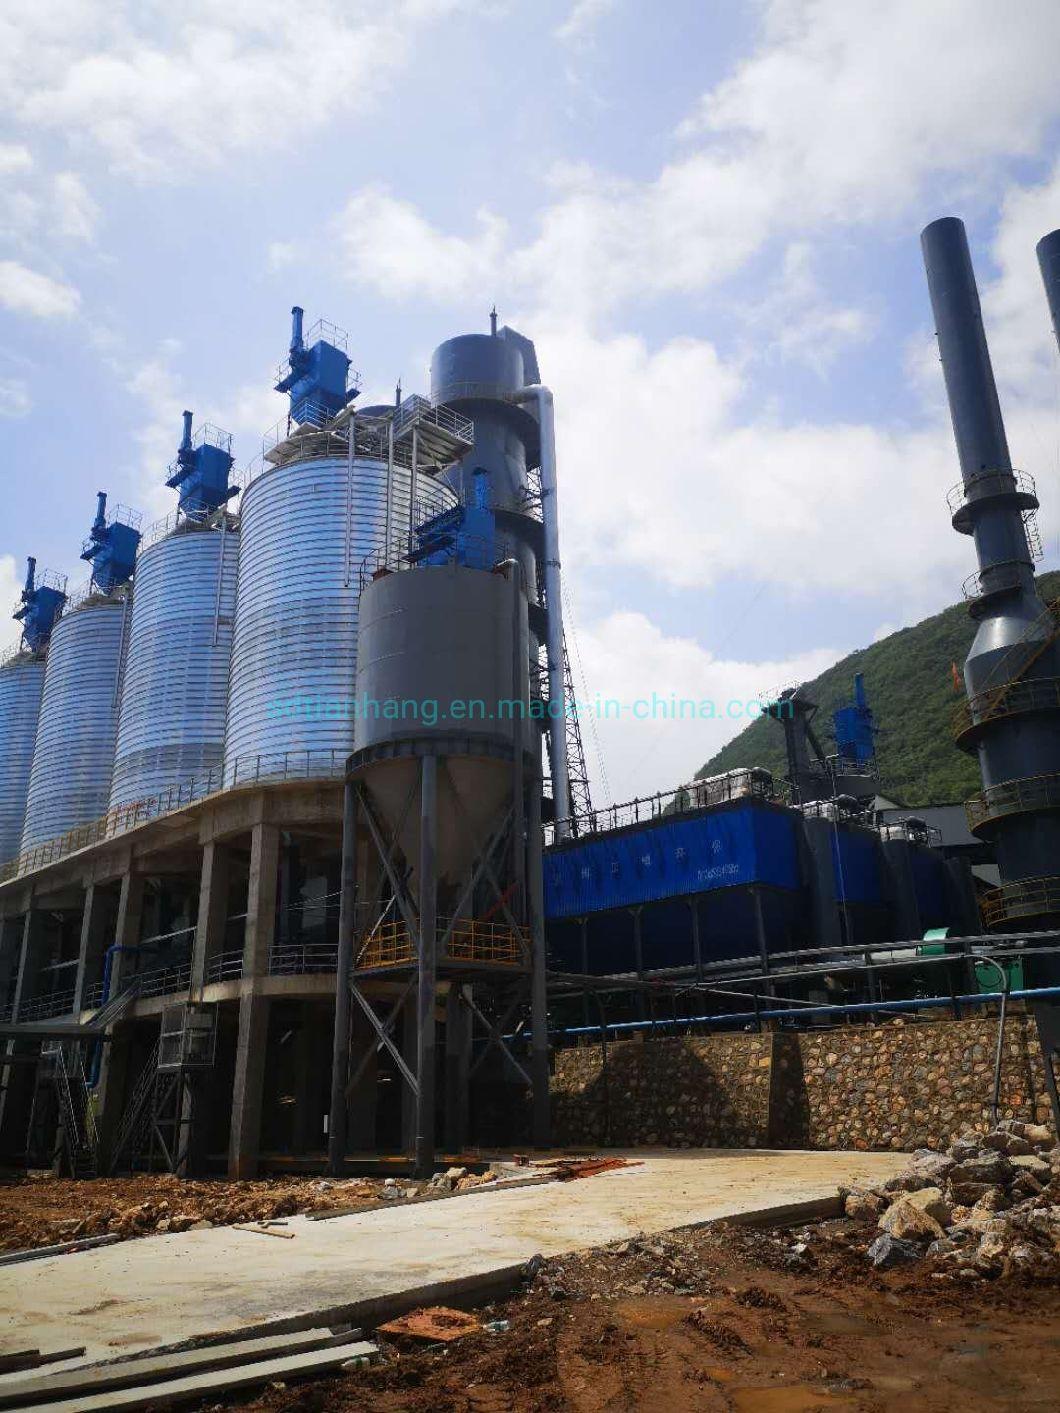 China Environmental Friendly Energy-Saving Drying Equipment Mining Machinery Cement Plant & Lime Production Line Vertical/Shaft Lime Kiln